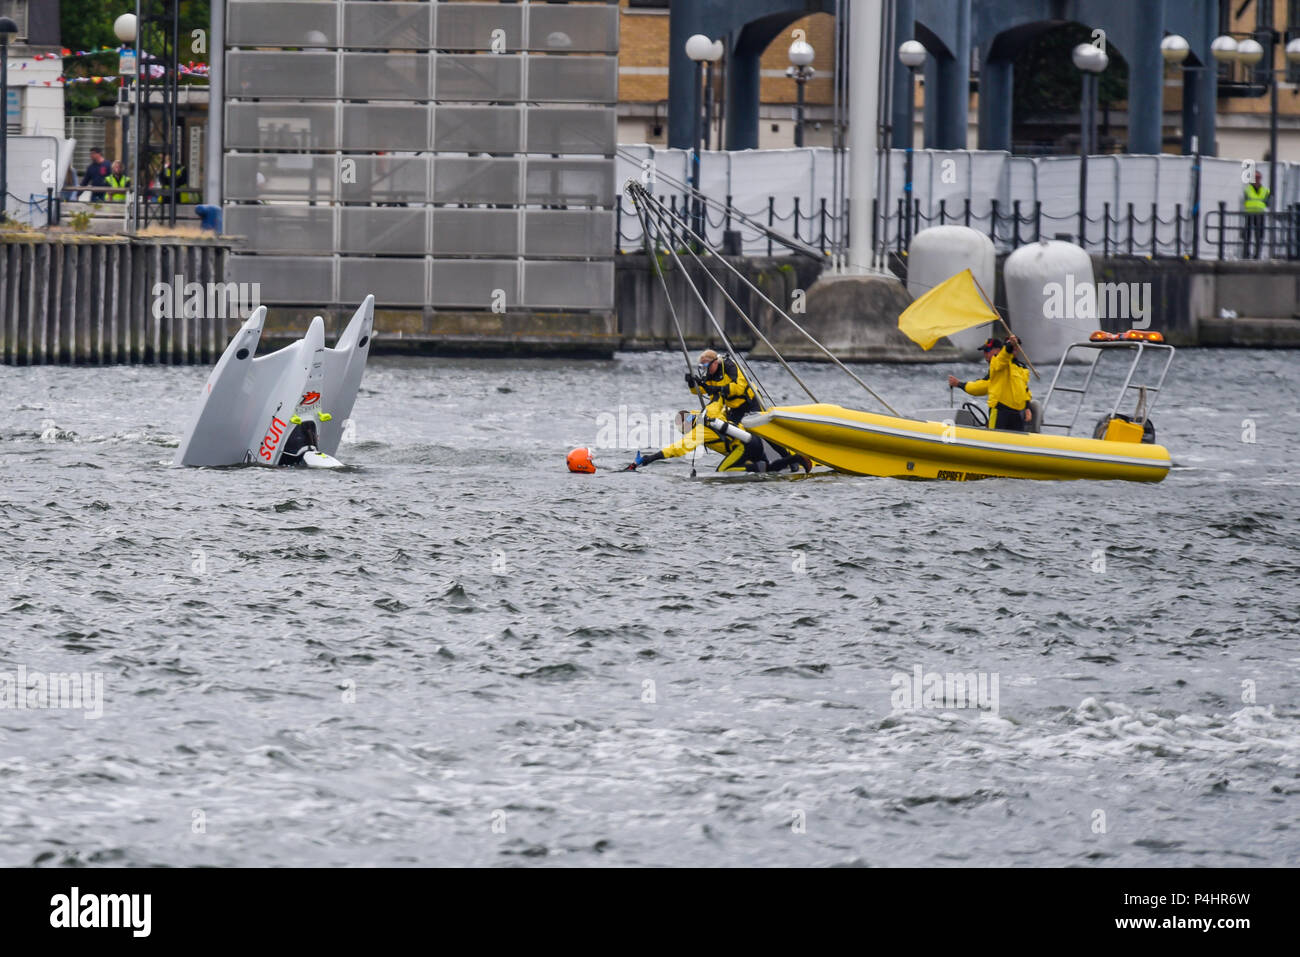 Louise Vella crashed in the F1H2O F4-S Powerboat Grand Prix of London at Royal Victoria Dock, Docklands, UK. Osprey rescue boat pulling her out Stock Photo